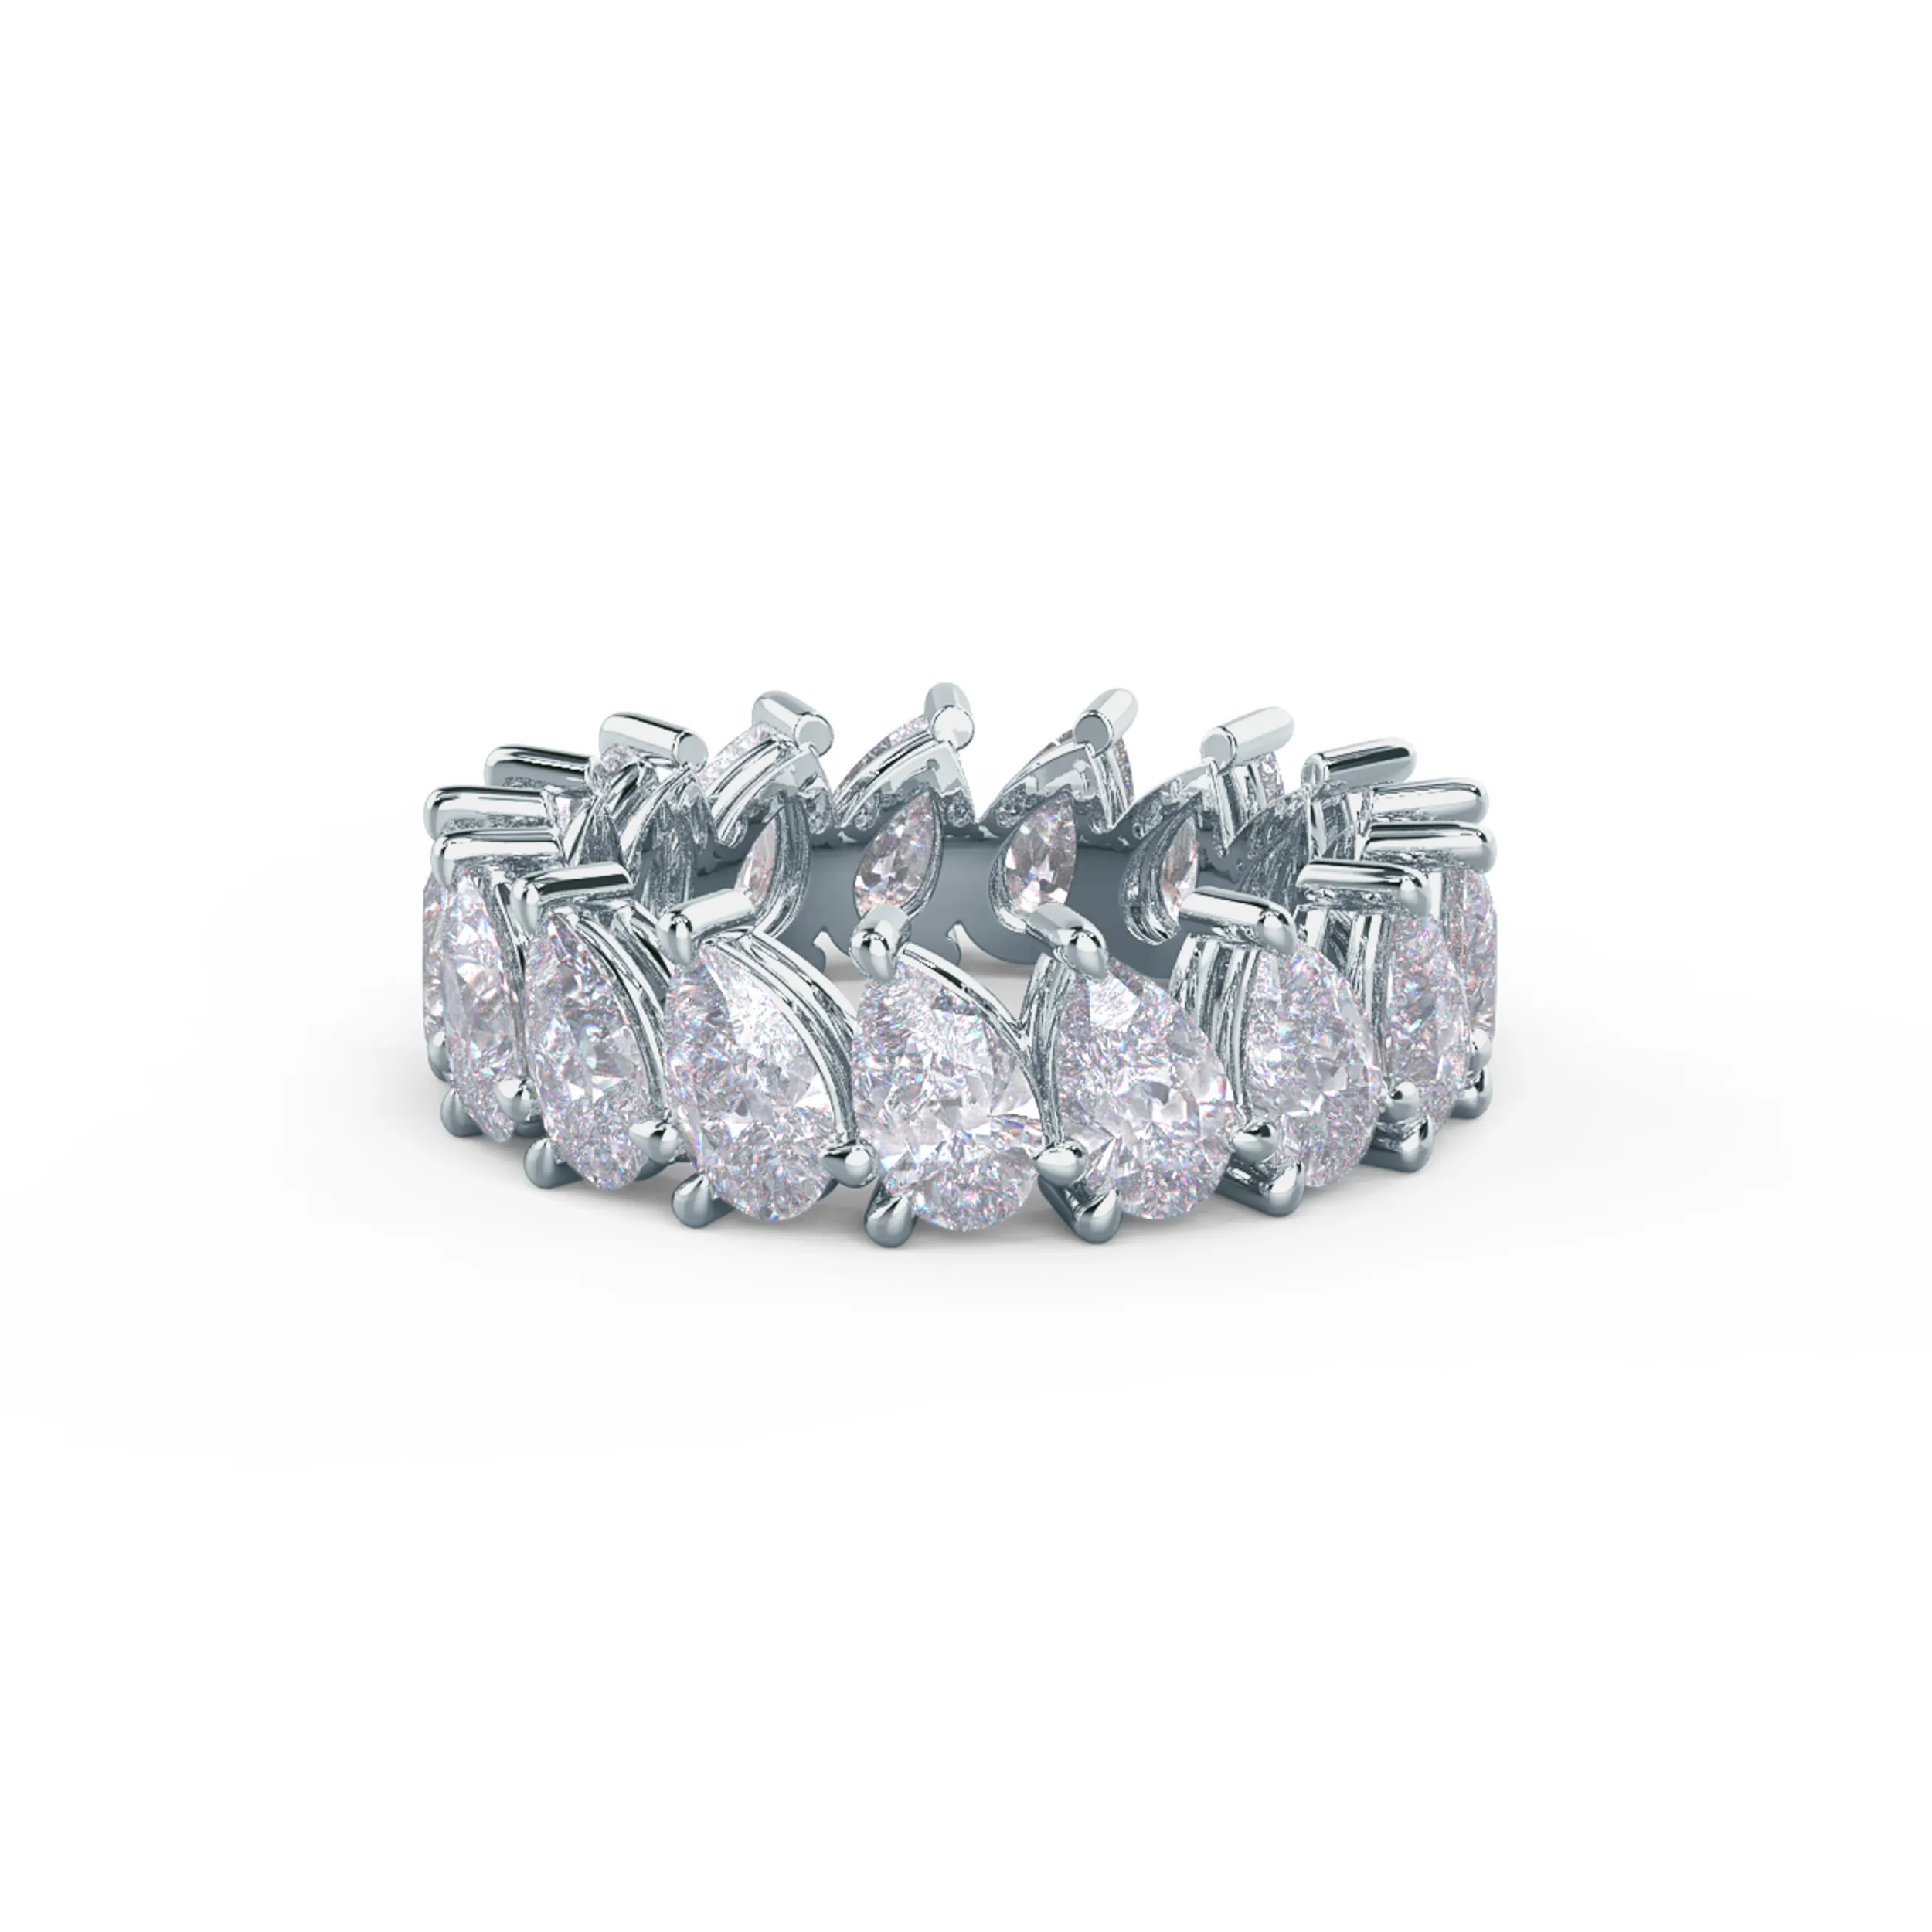 White Gold Pear Angled Eternity Band featuring Hand Selected 5.0 ct Created Diamonds (Main View)